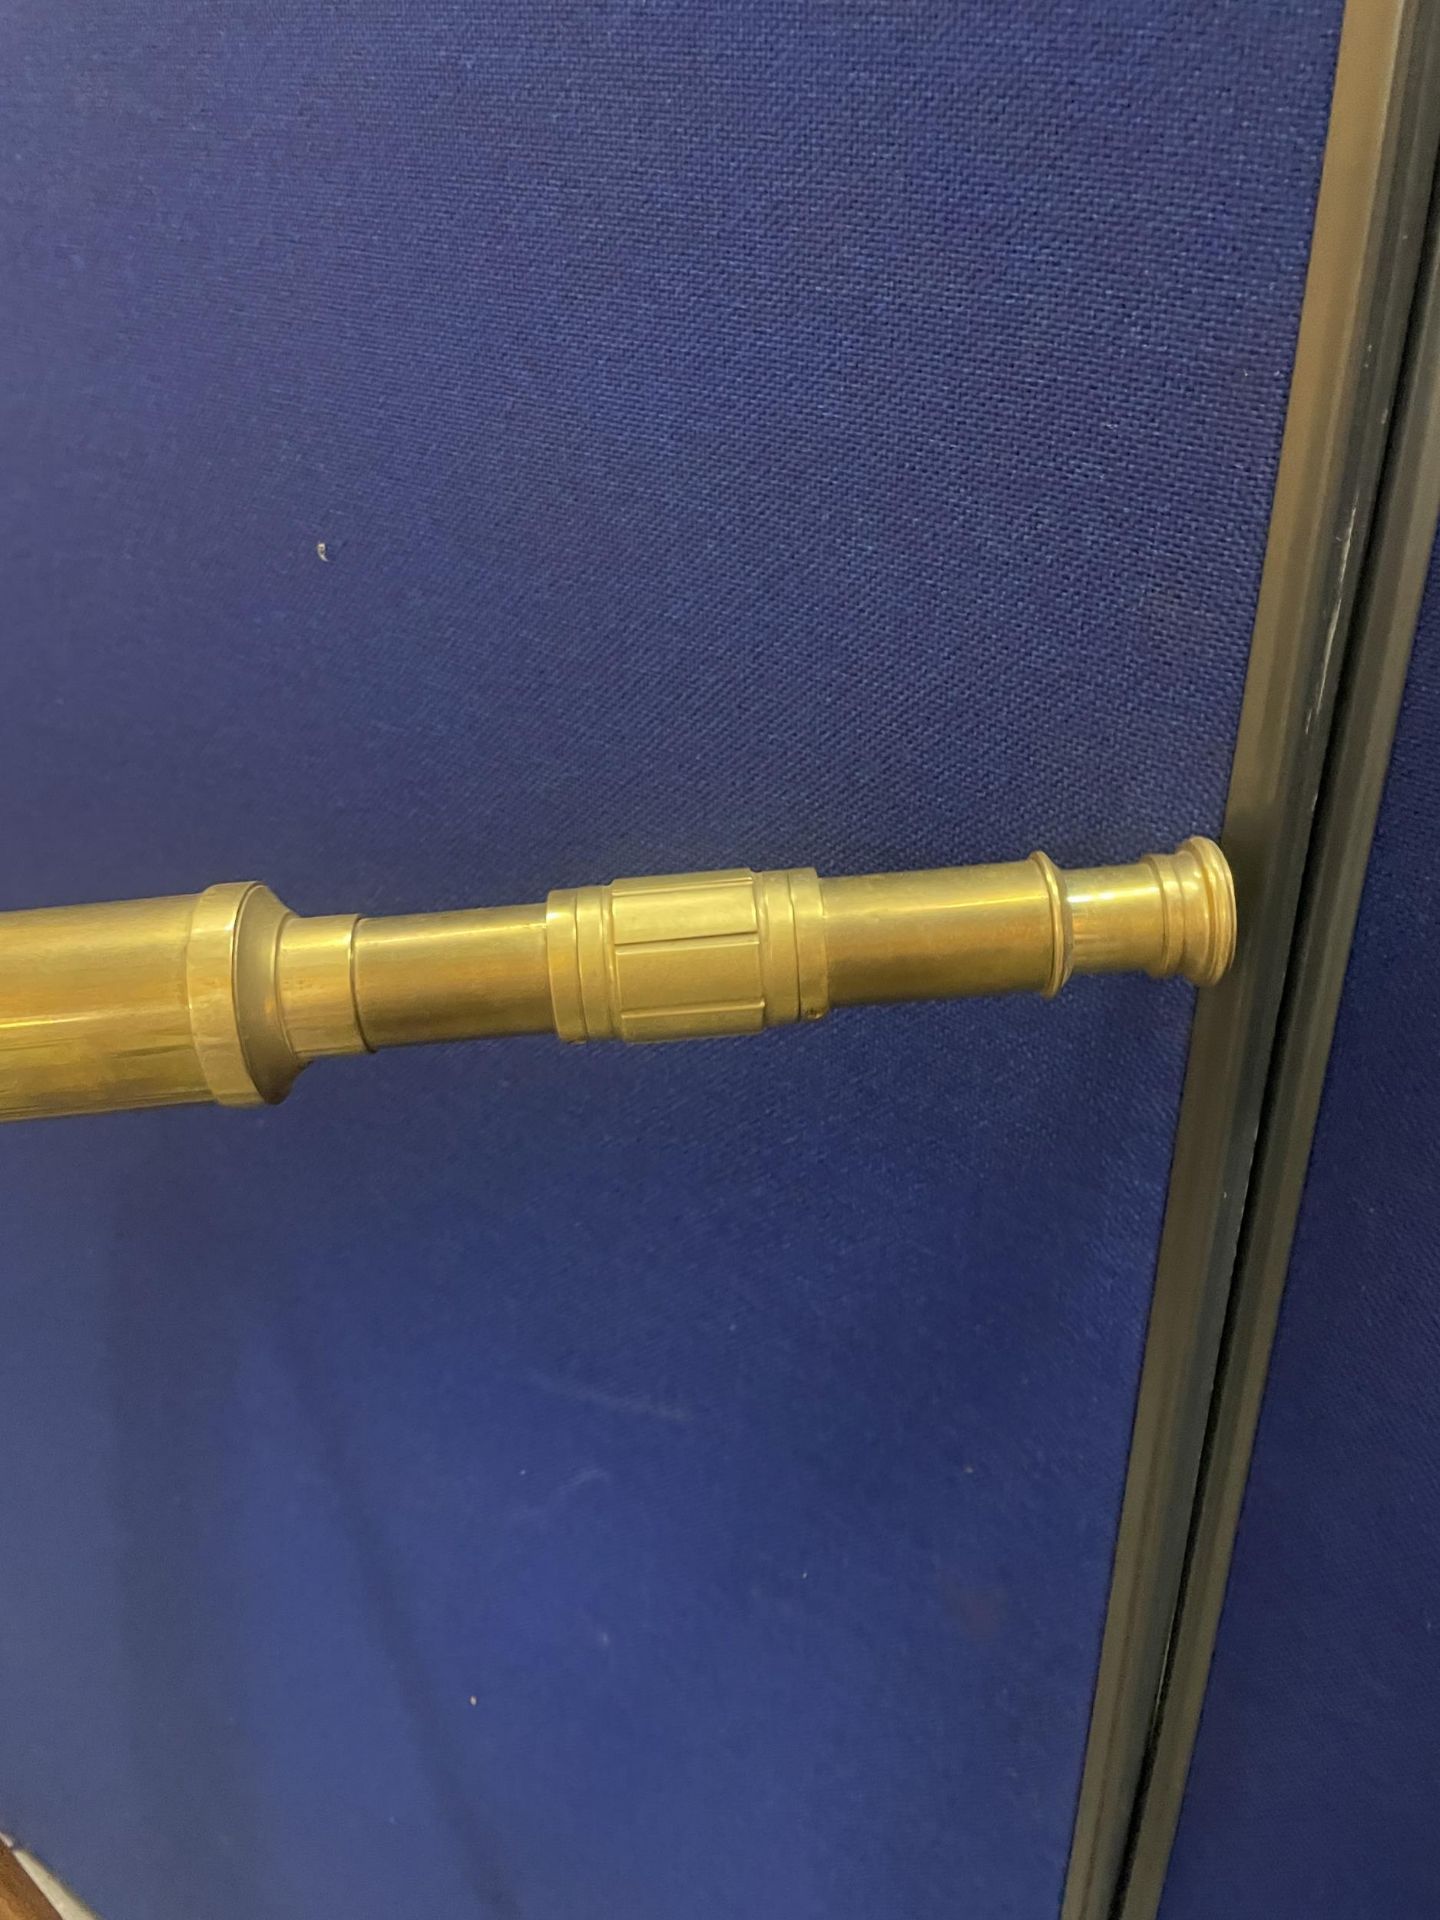 A BRASS TELESCOPE ON AN ADJUSTABLE TRIPOD STAND - Image 2 of 4